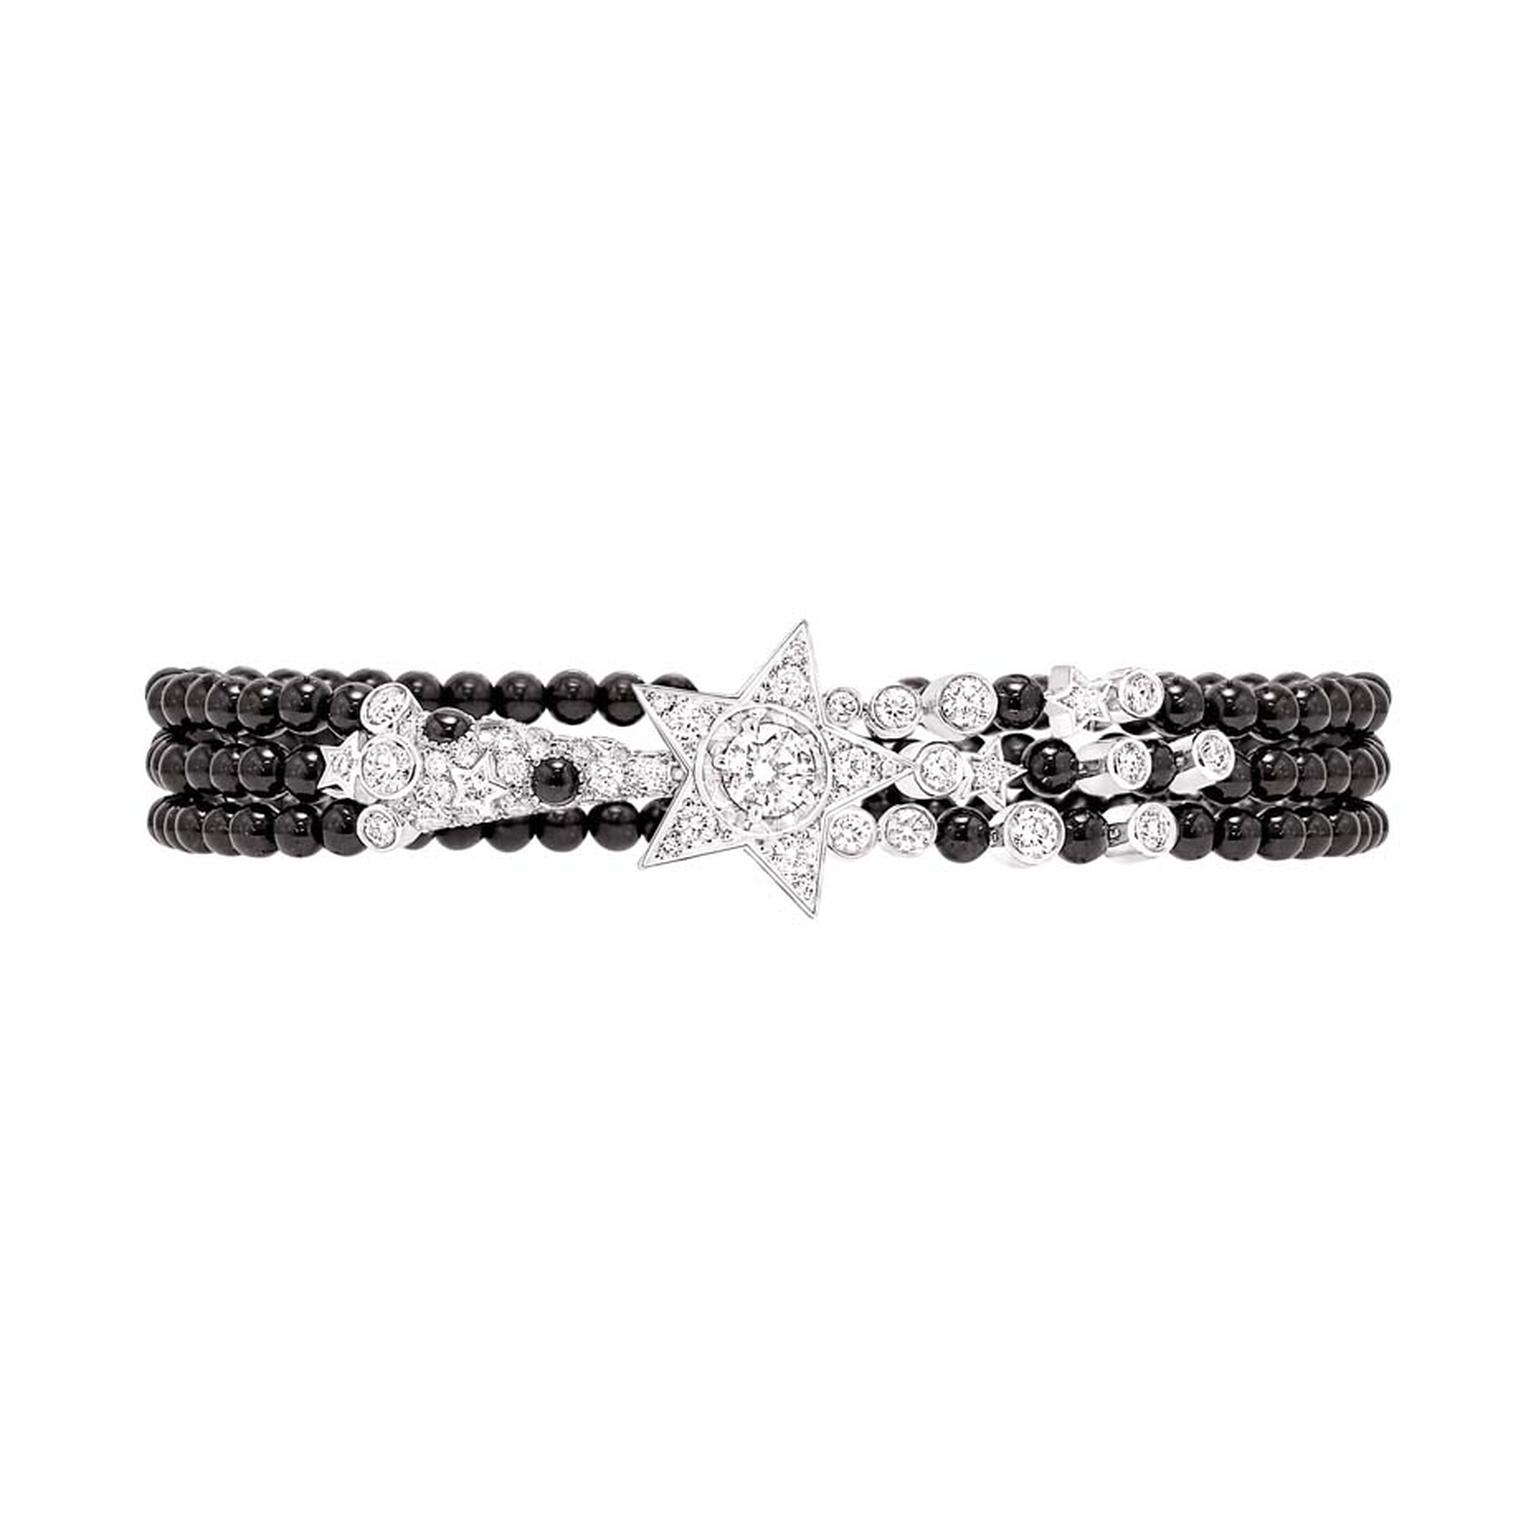 Chanel Nuit de Diamants bracelet in white gold with diamonds and black spinel beads, from the Comete high jewellery collection.